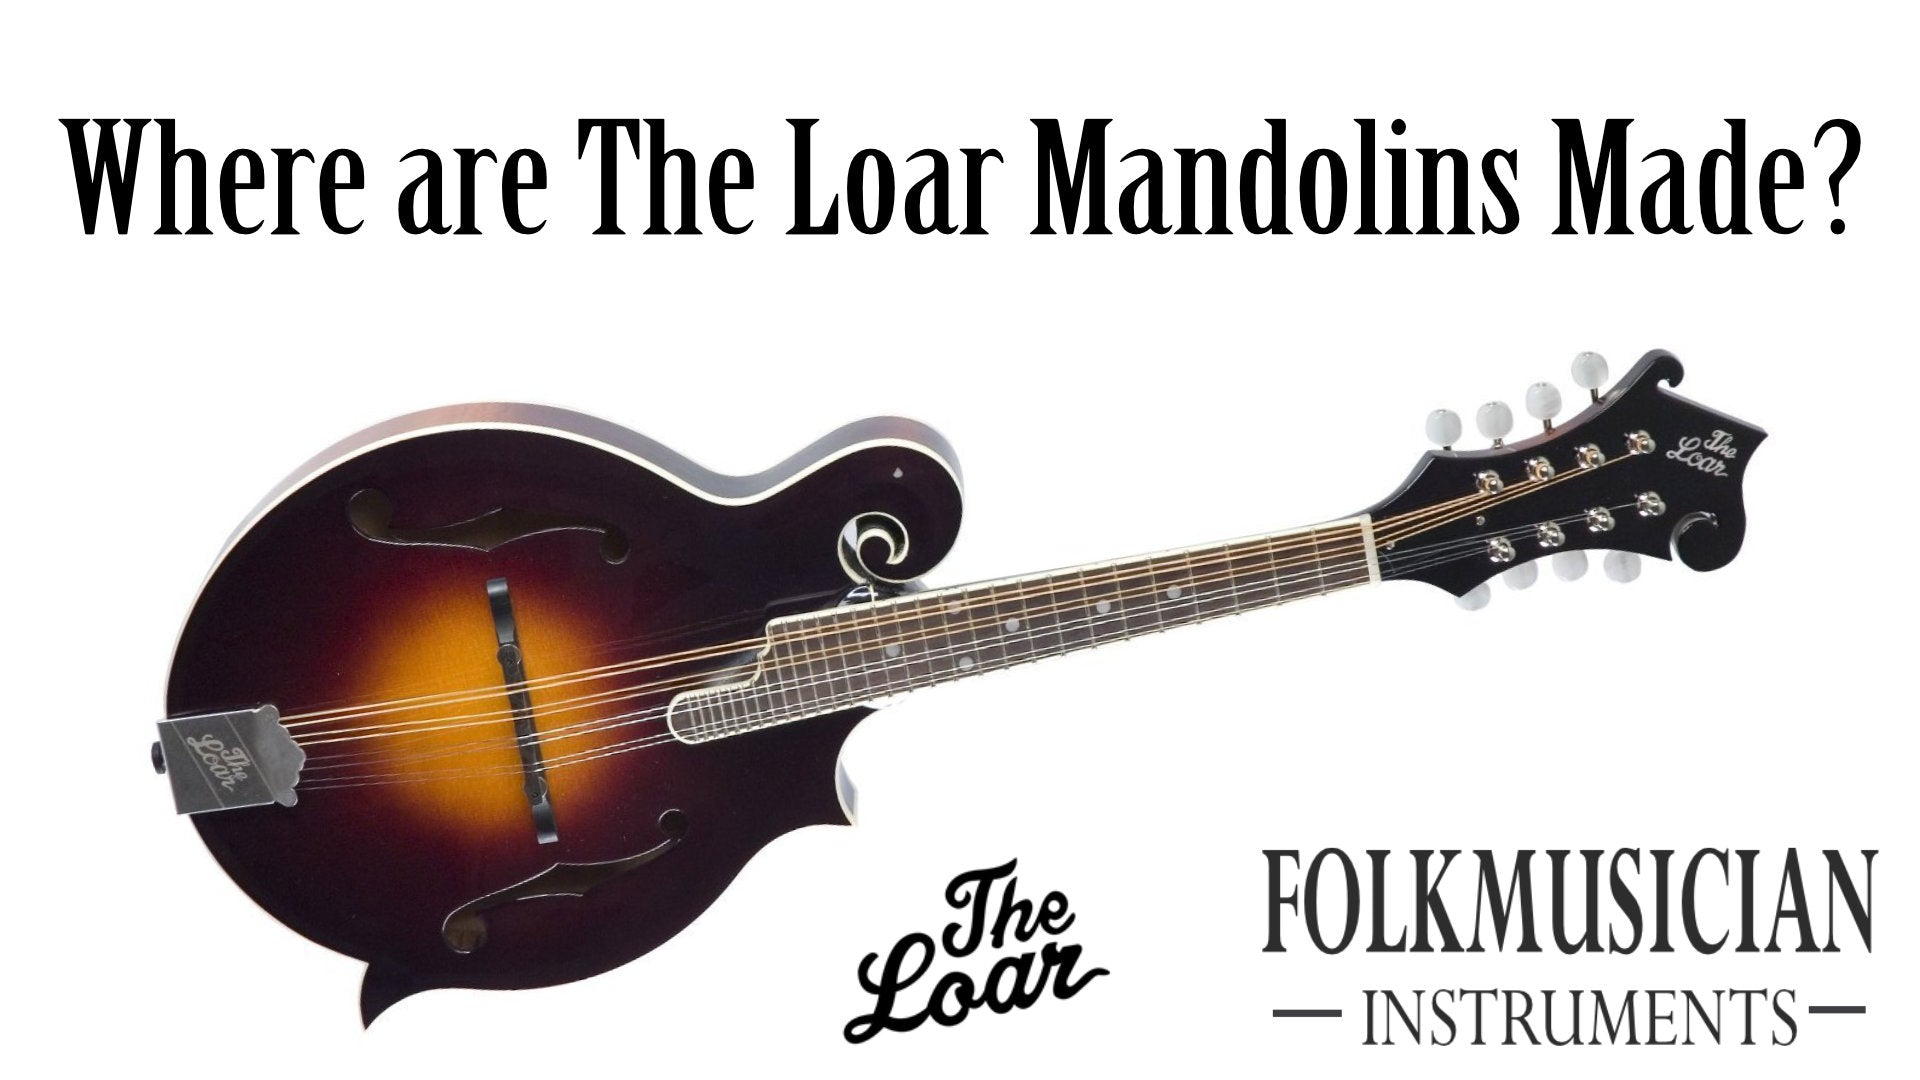 Where are The Loar Mandolins made?